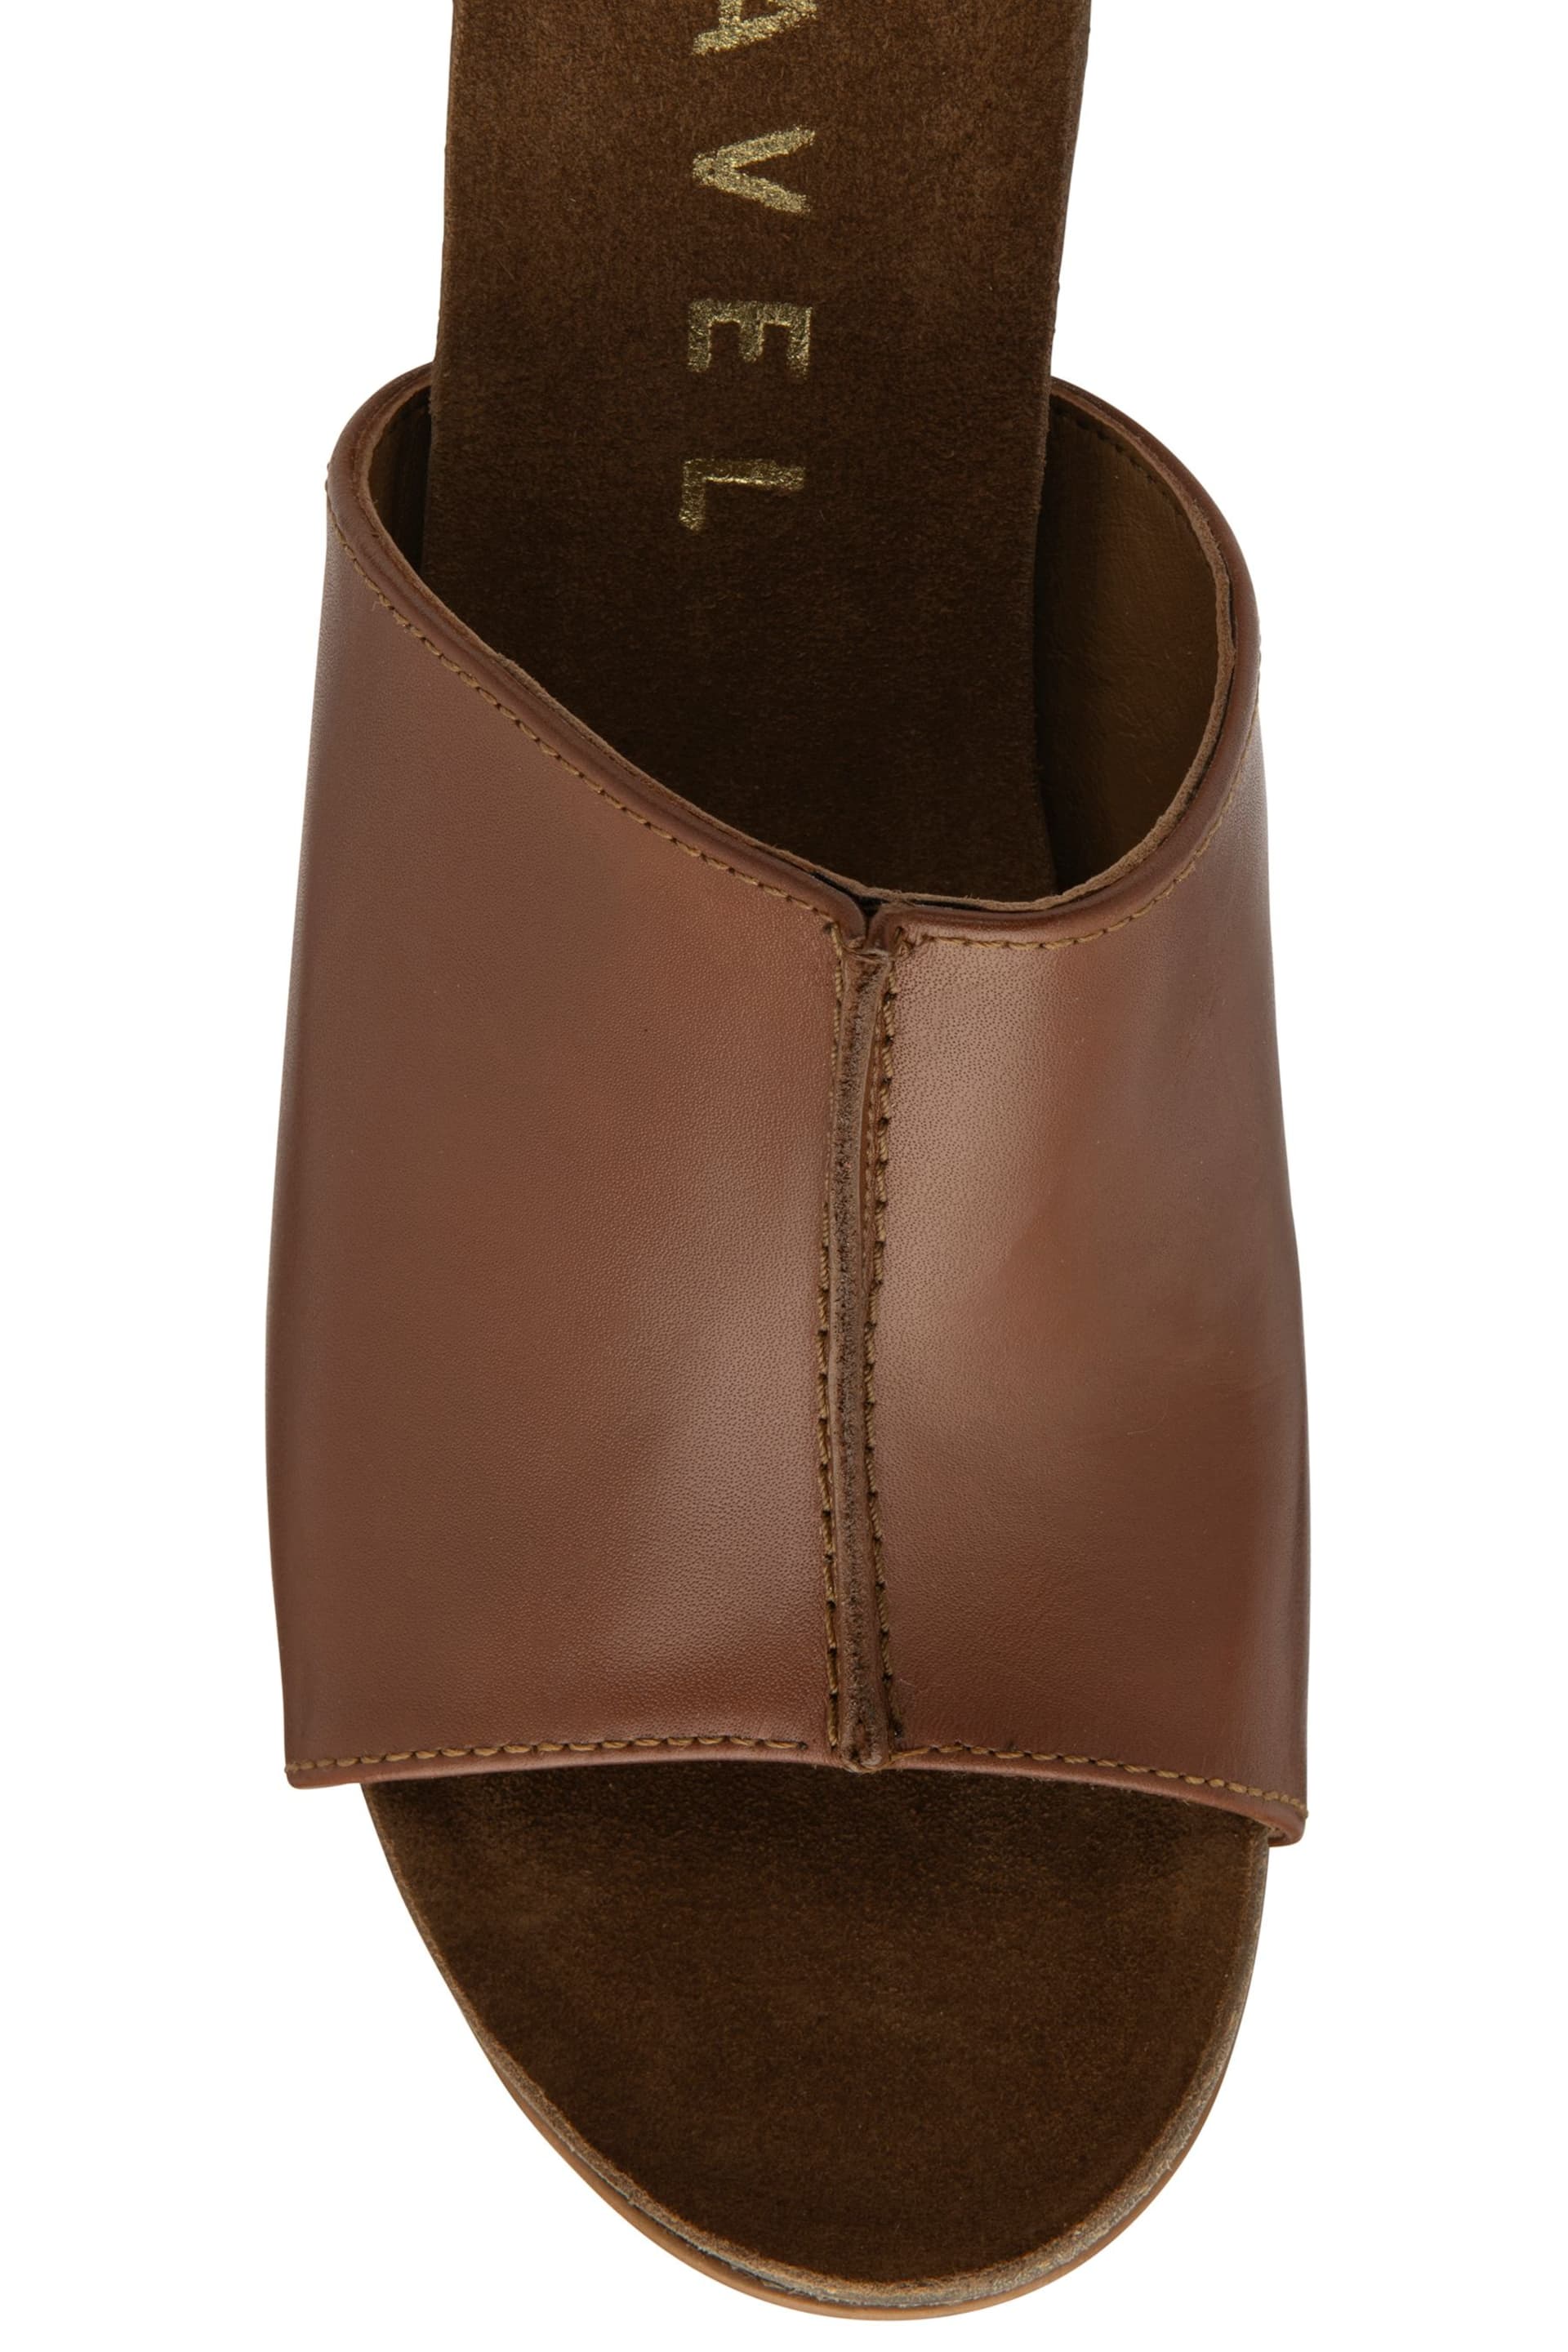 Ravel Brown Leather Wedge Mule Sandals - Image 4 of 4